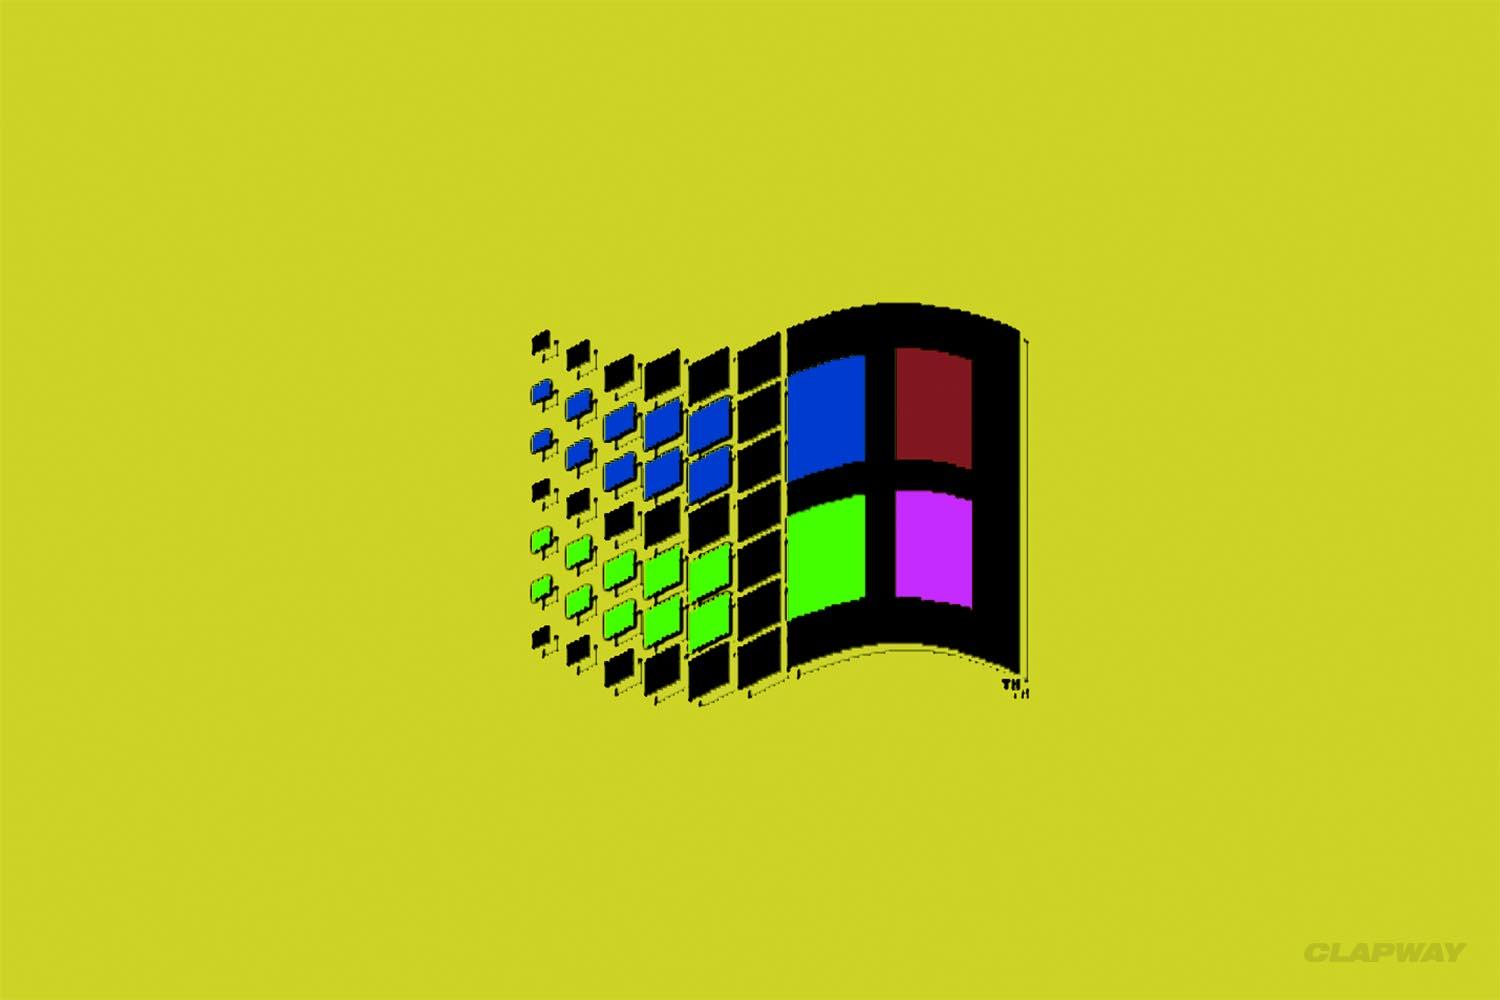 Microsoft Windows 3.1 Logo - 2 Reasons Why The Ability to Play Microsoft Windows Games is Amazing